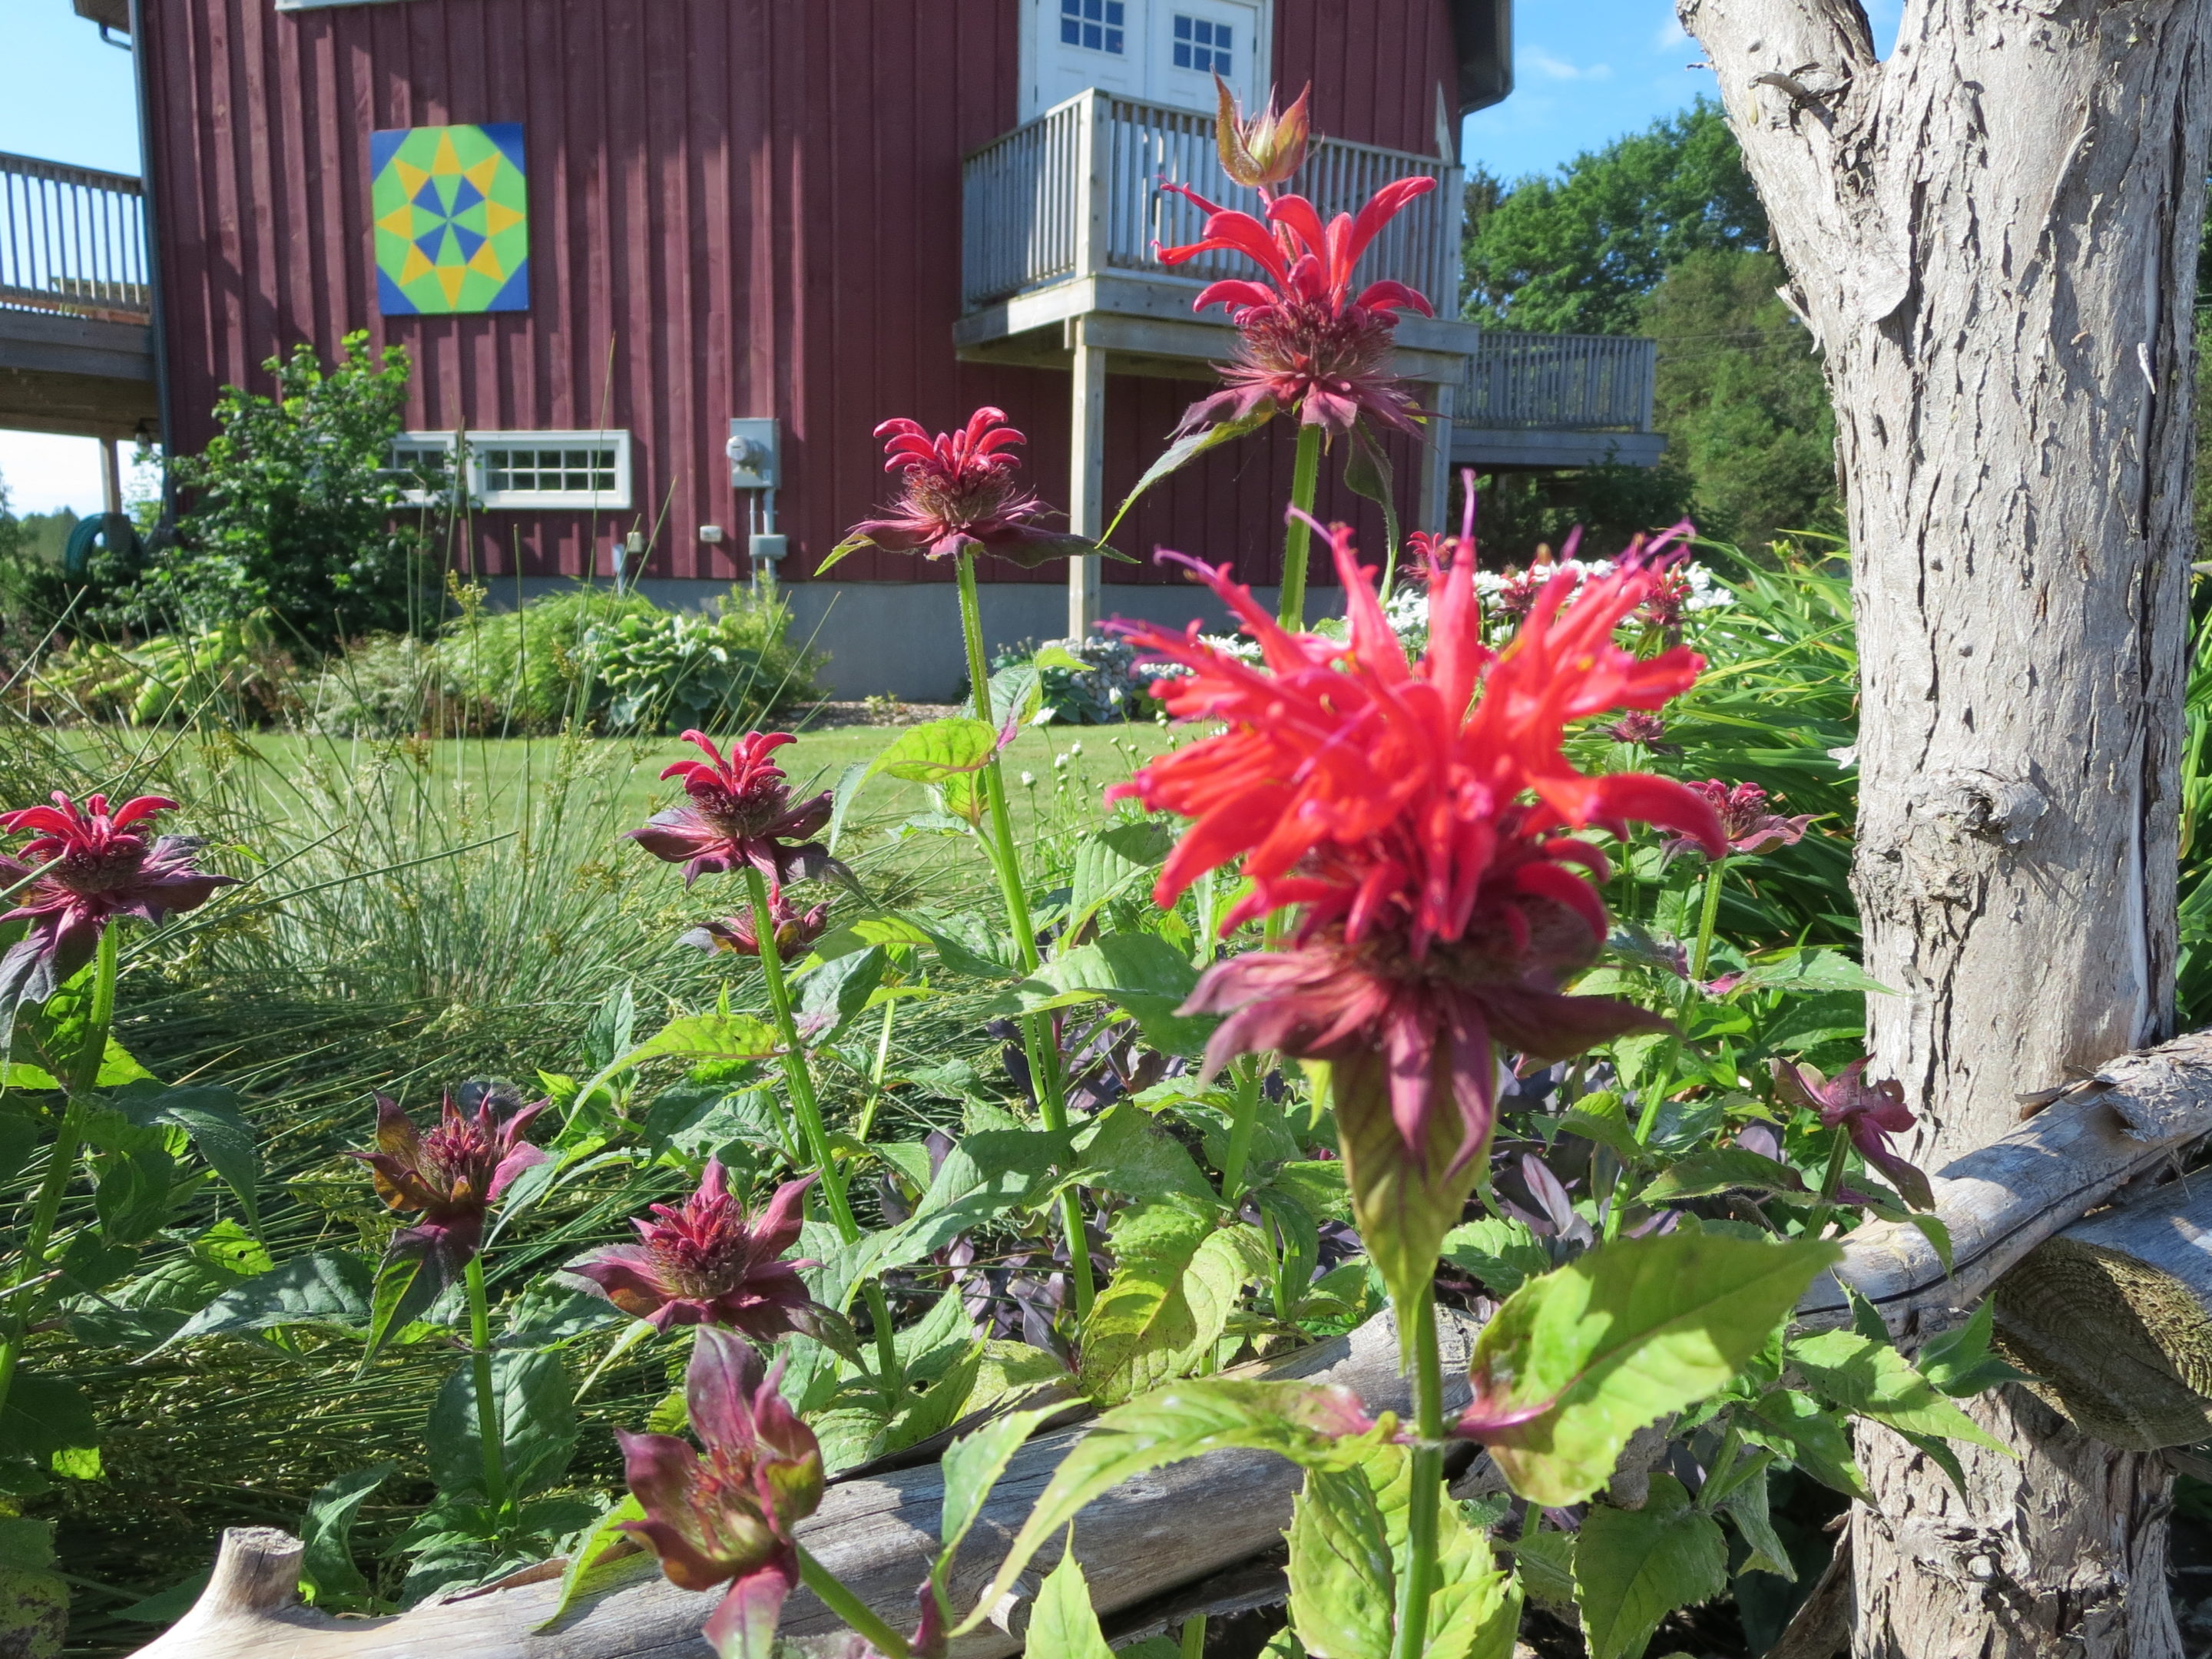 A view of Crazy 8 Barn's Evening Star Barn Quilt with native Bee Balm red flower in foreground